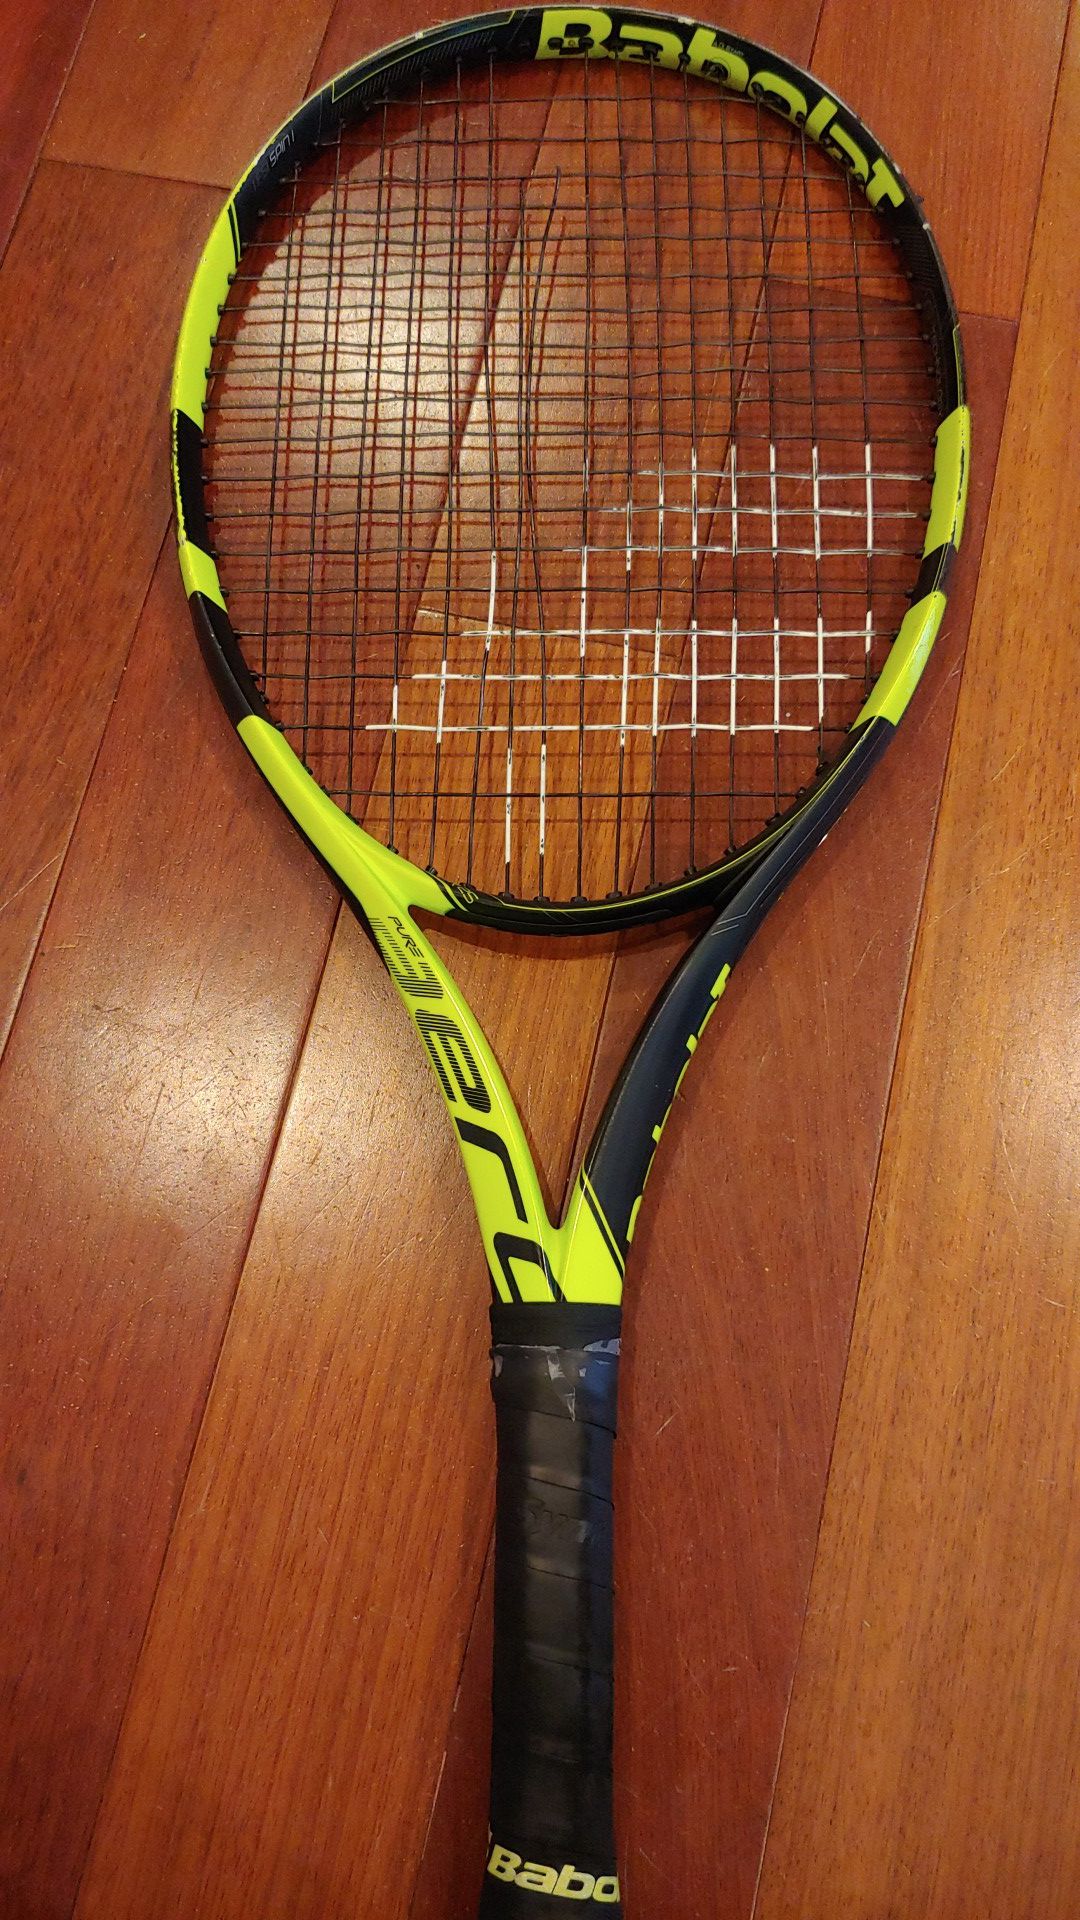 Babolat Tennis racket-25 inches